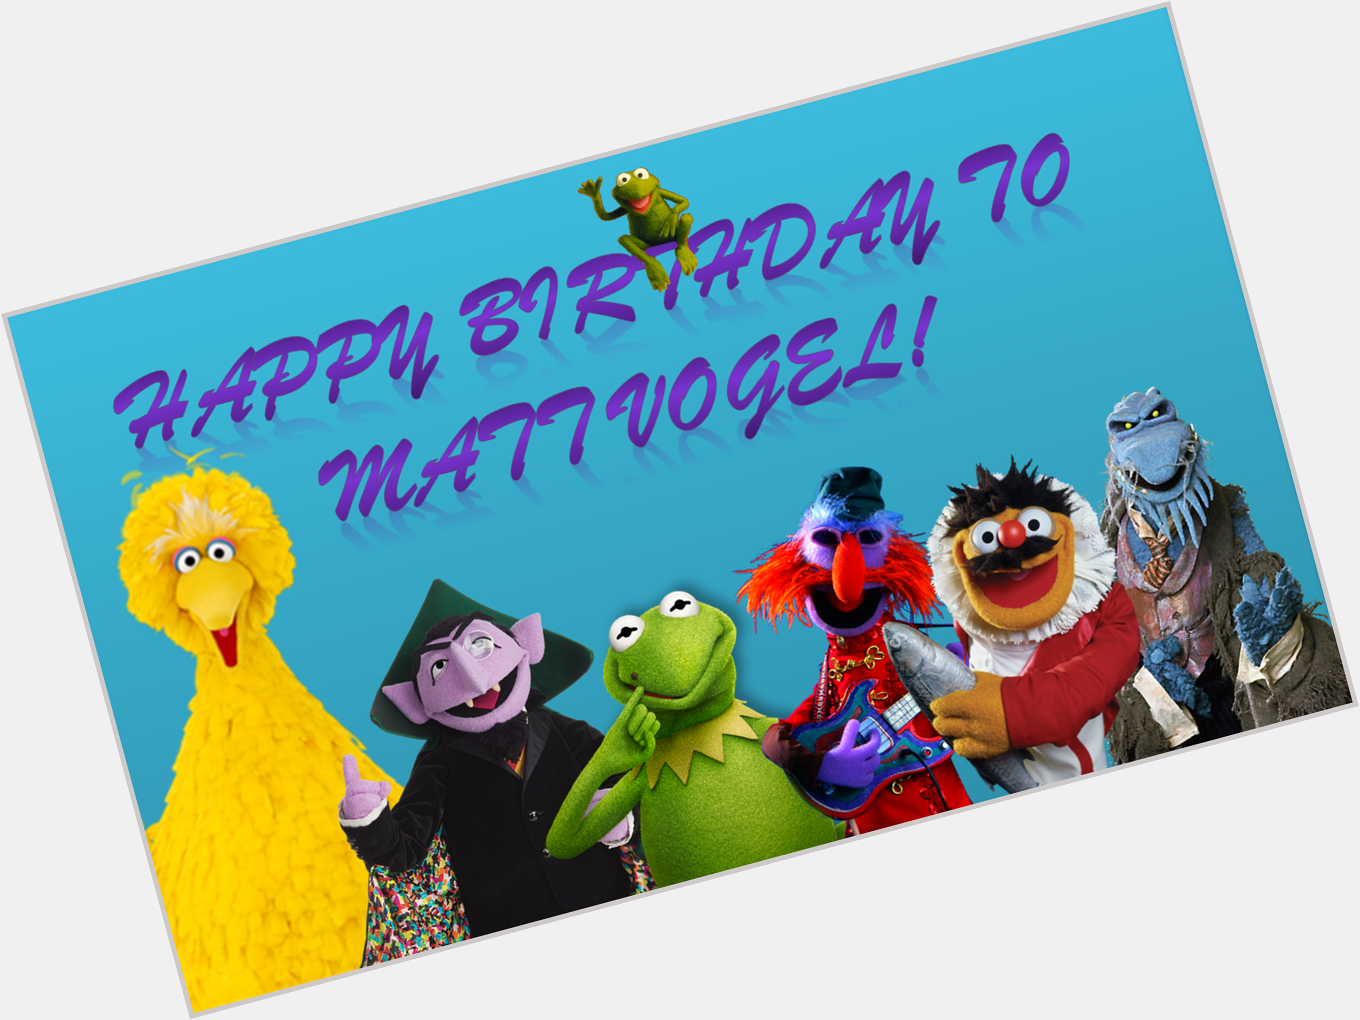 Happy Birthday to Muppeteer Matt Vogel! I hope that we can meet, and I hope you have a great birthday! 